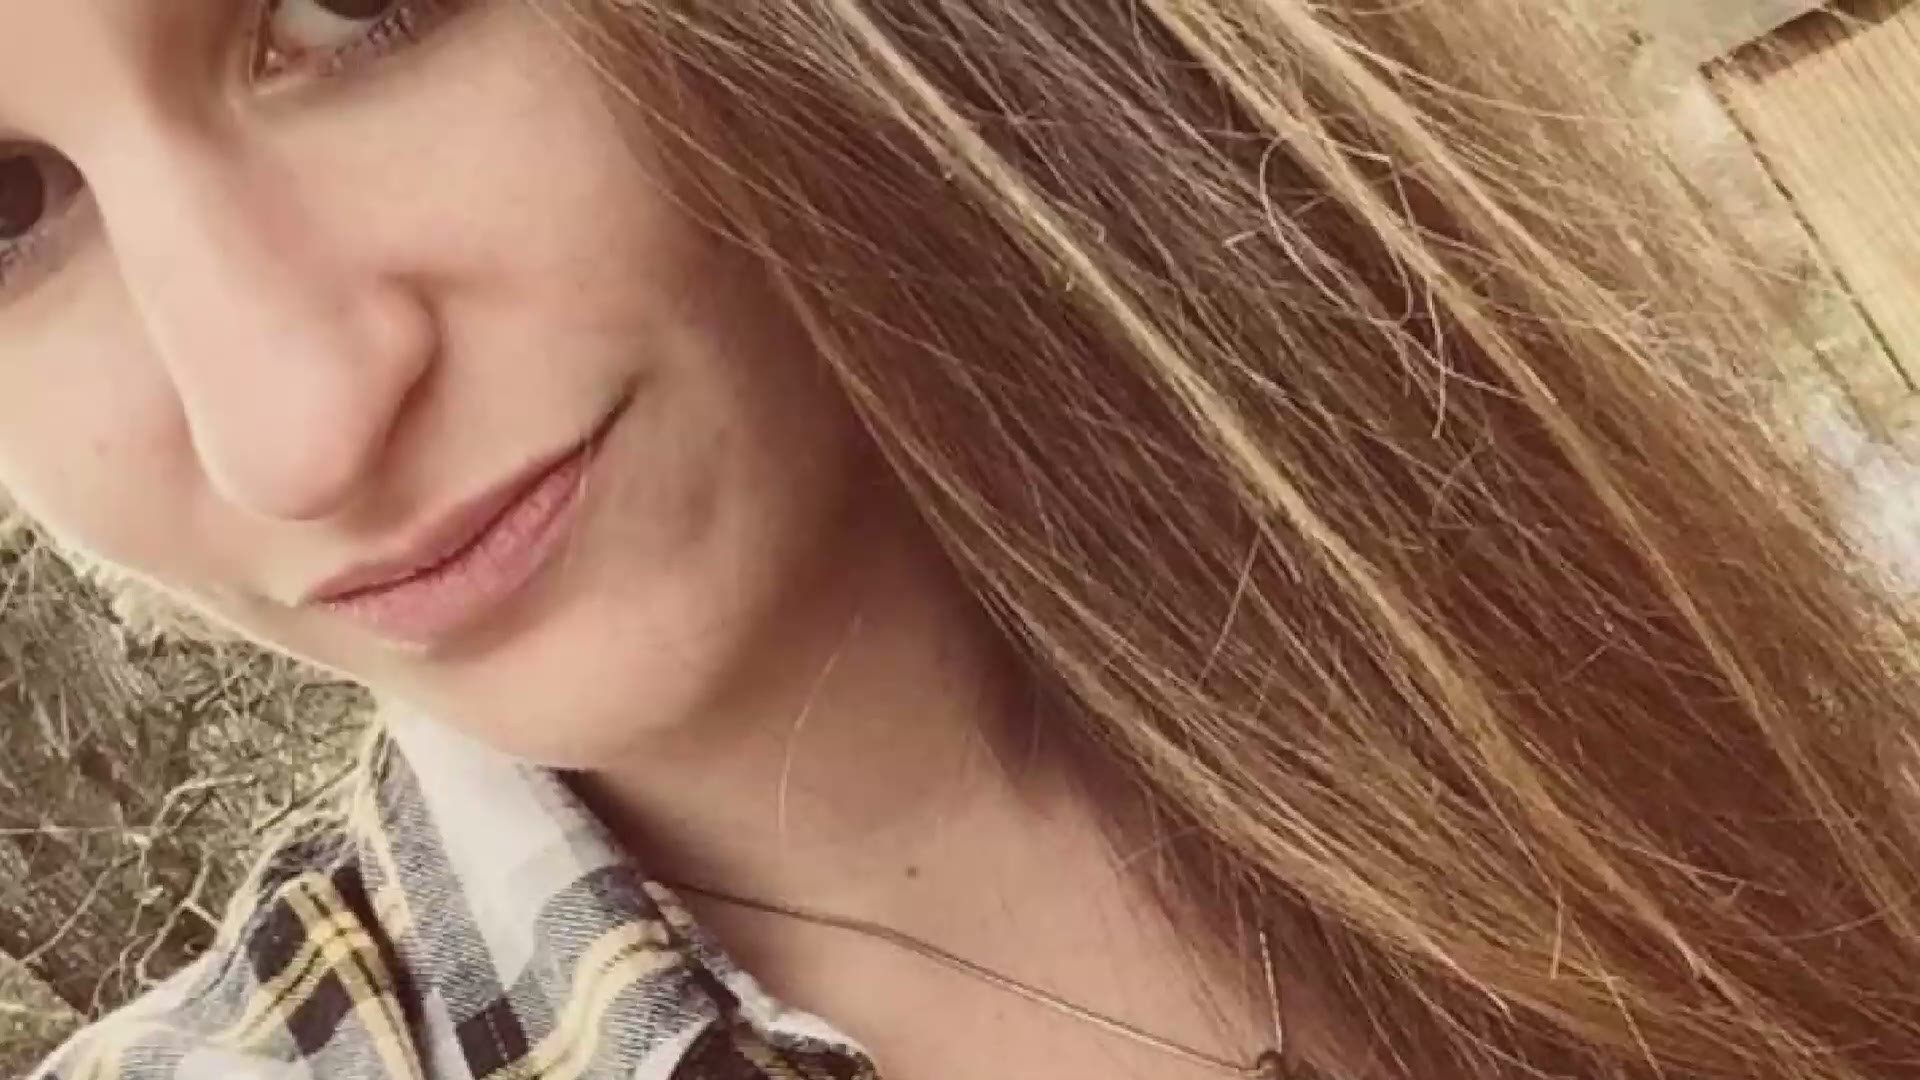 The Blount County Sheriff's Office found Cheyenne Shropshire's remains in March of 2020. She went missing back in 2018.